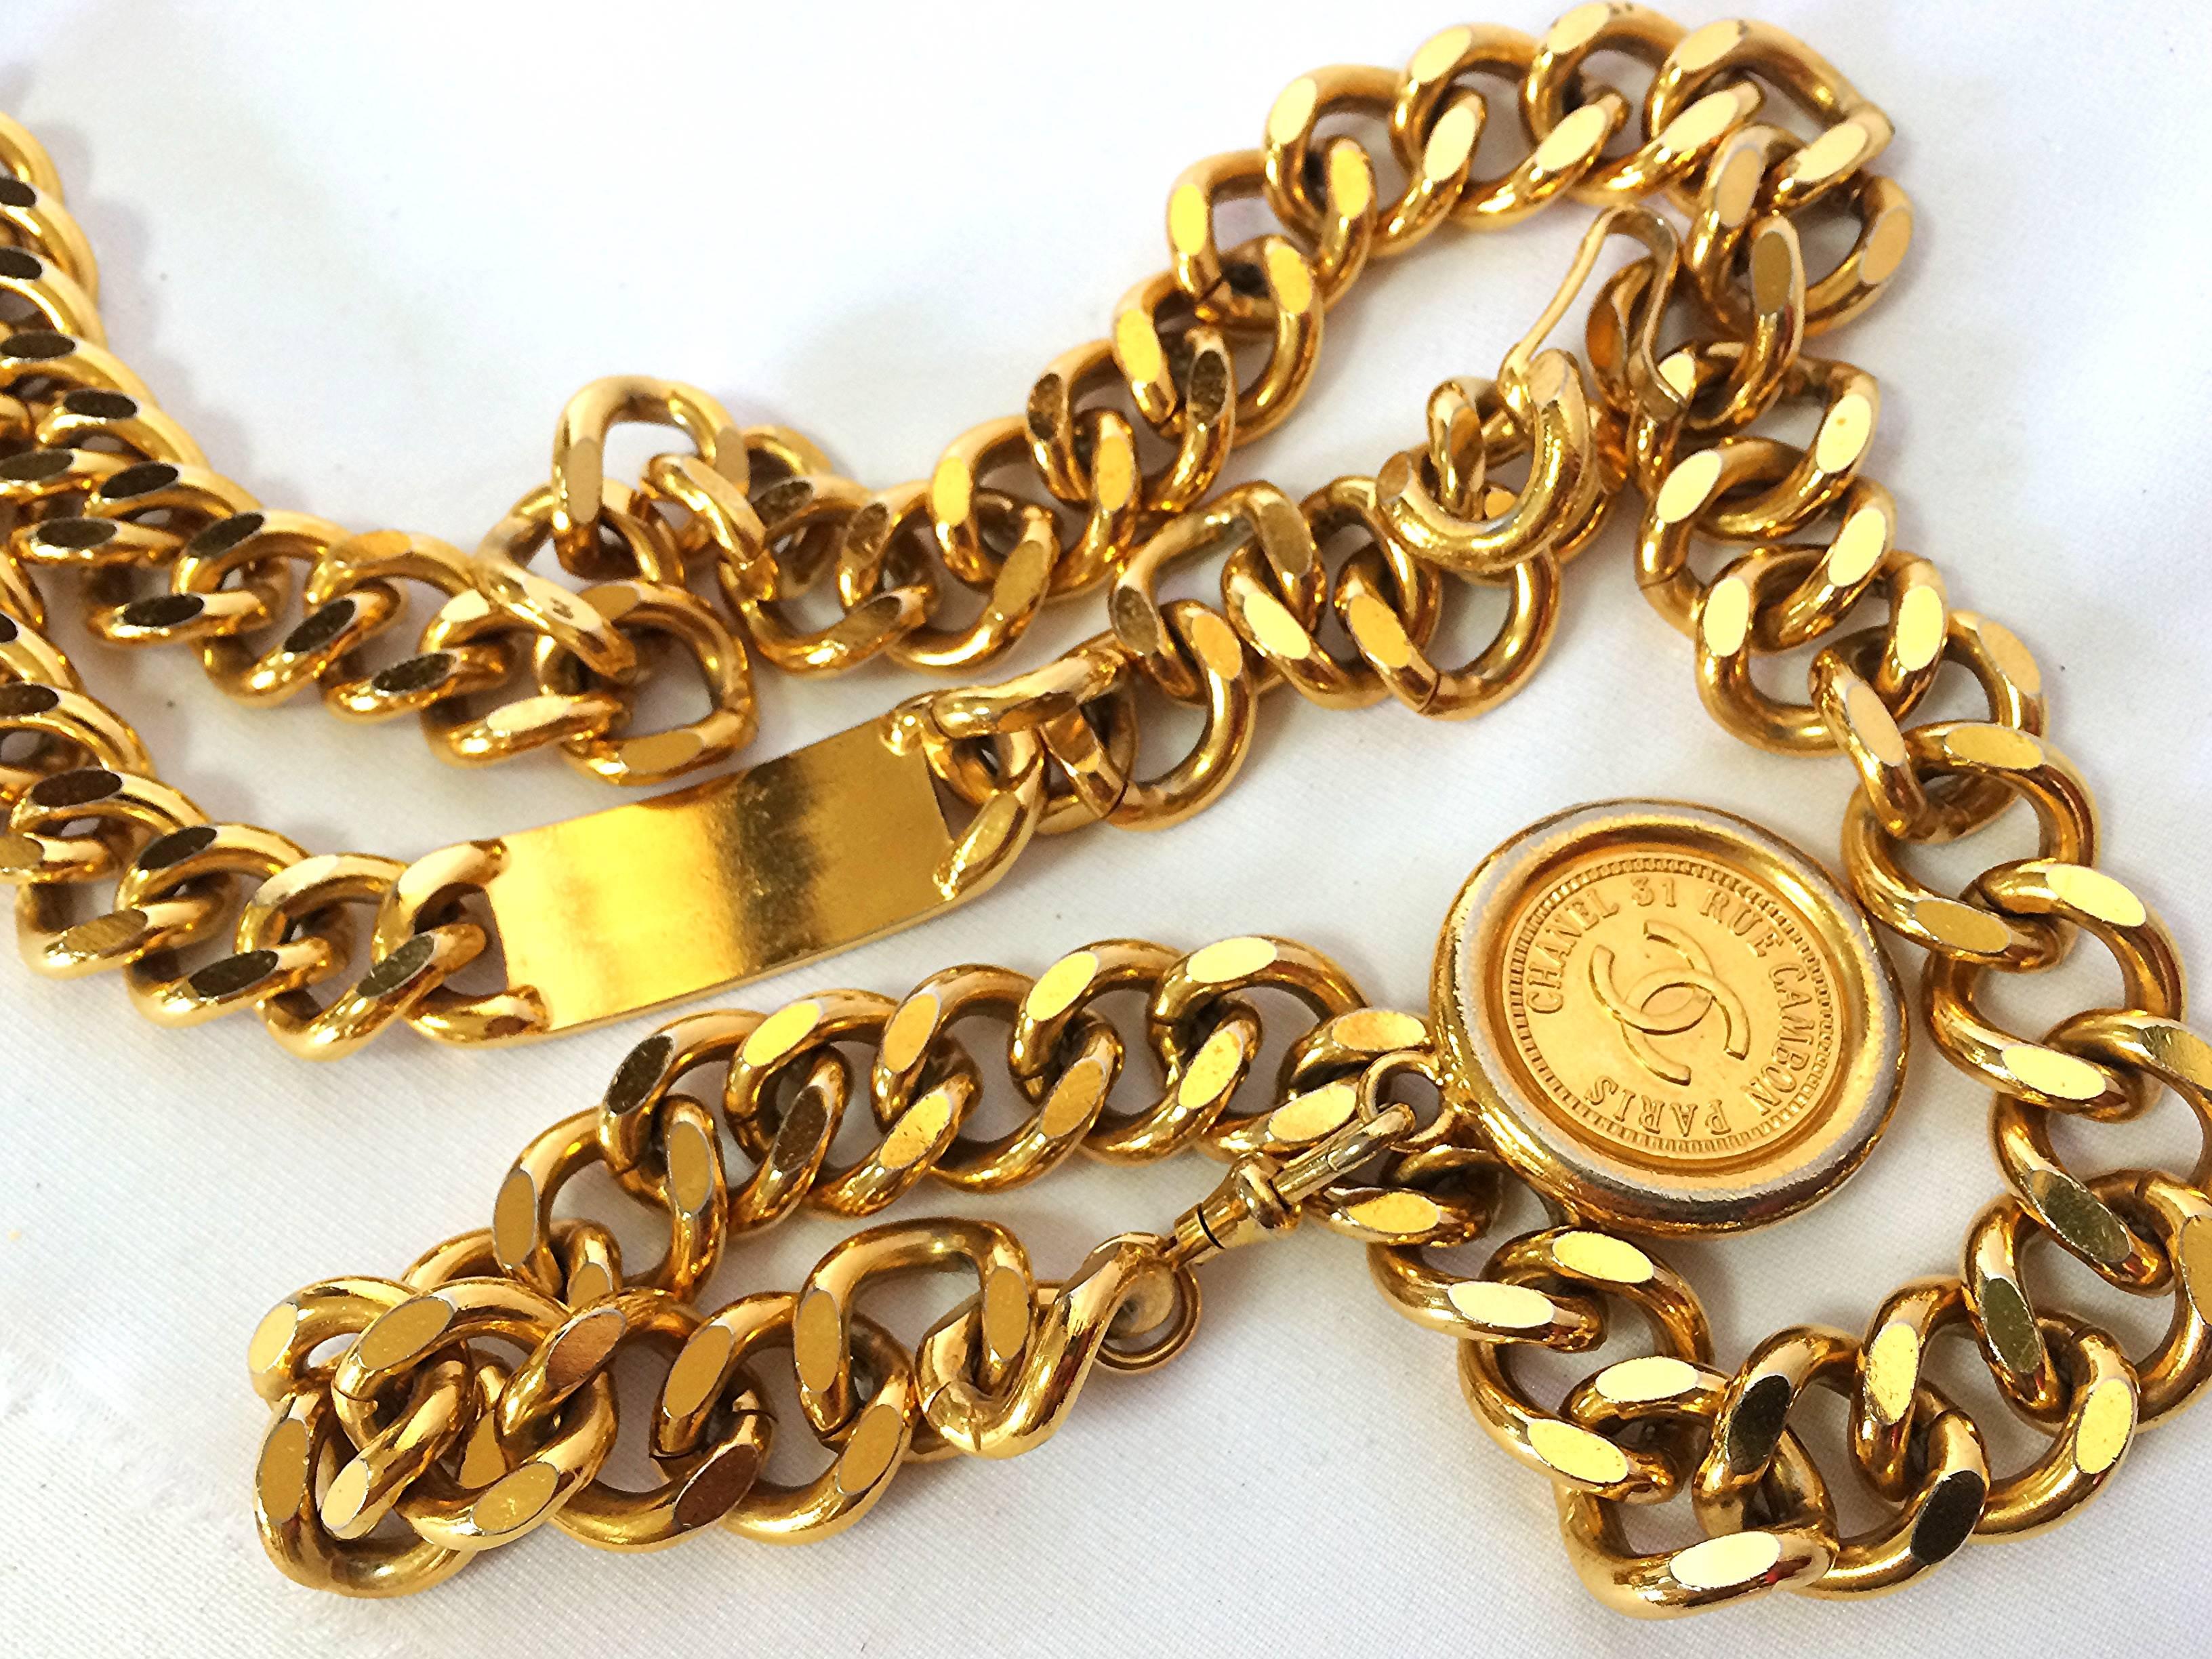 Women's Vintage CHANEL golden thick chain belt with a golden CC charm and logo plate. 